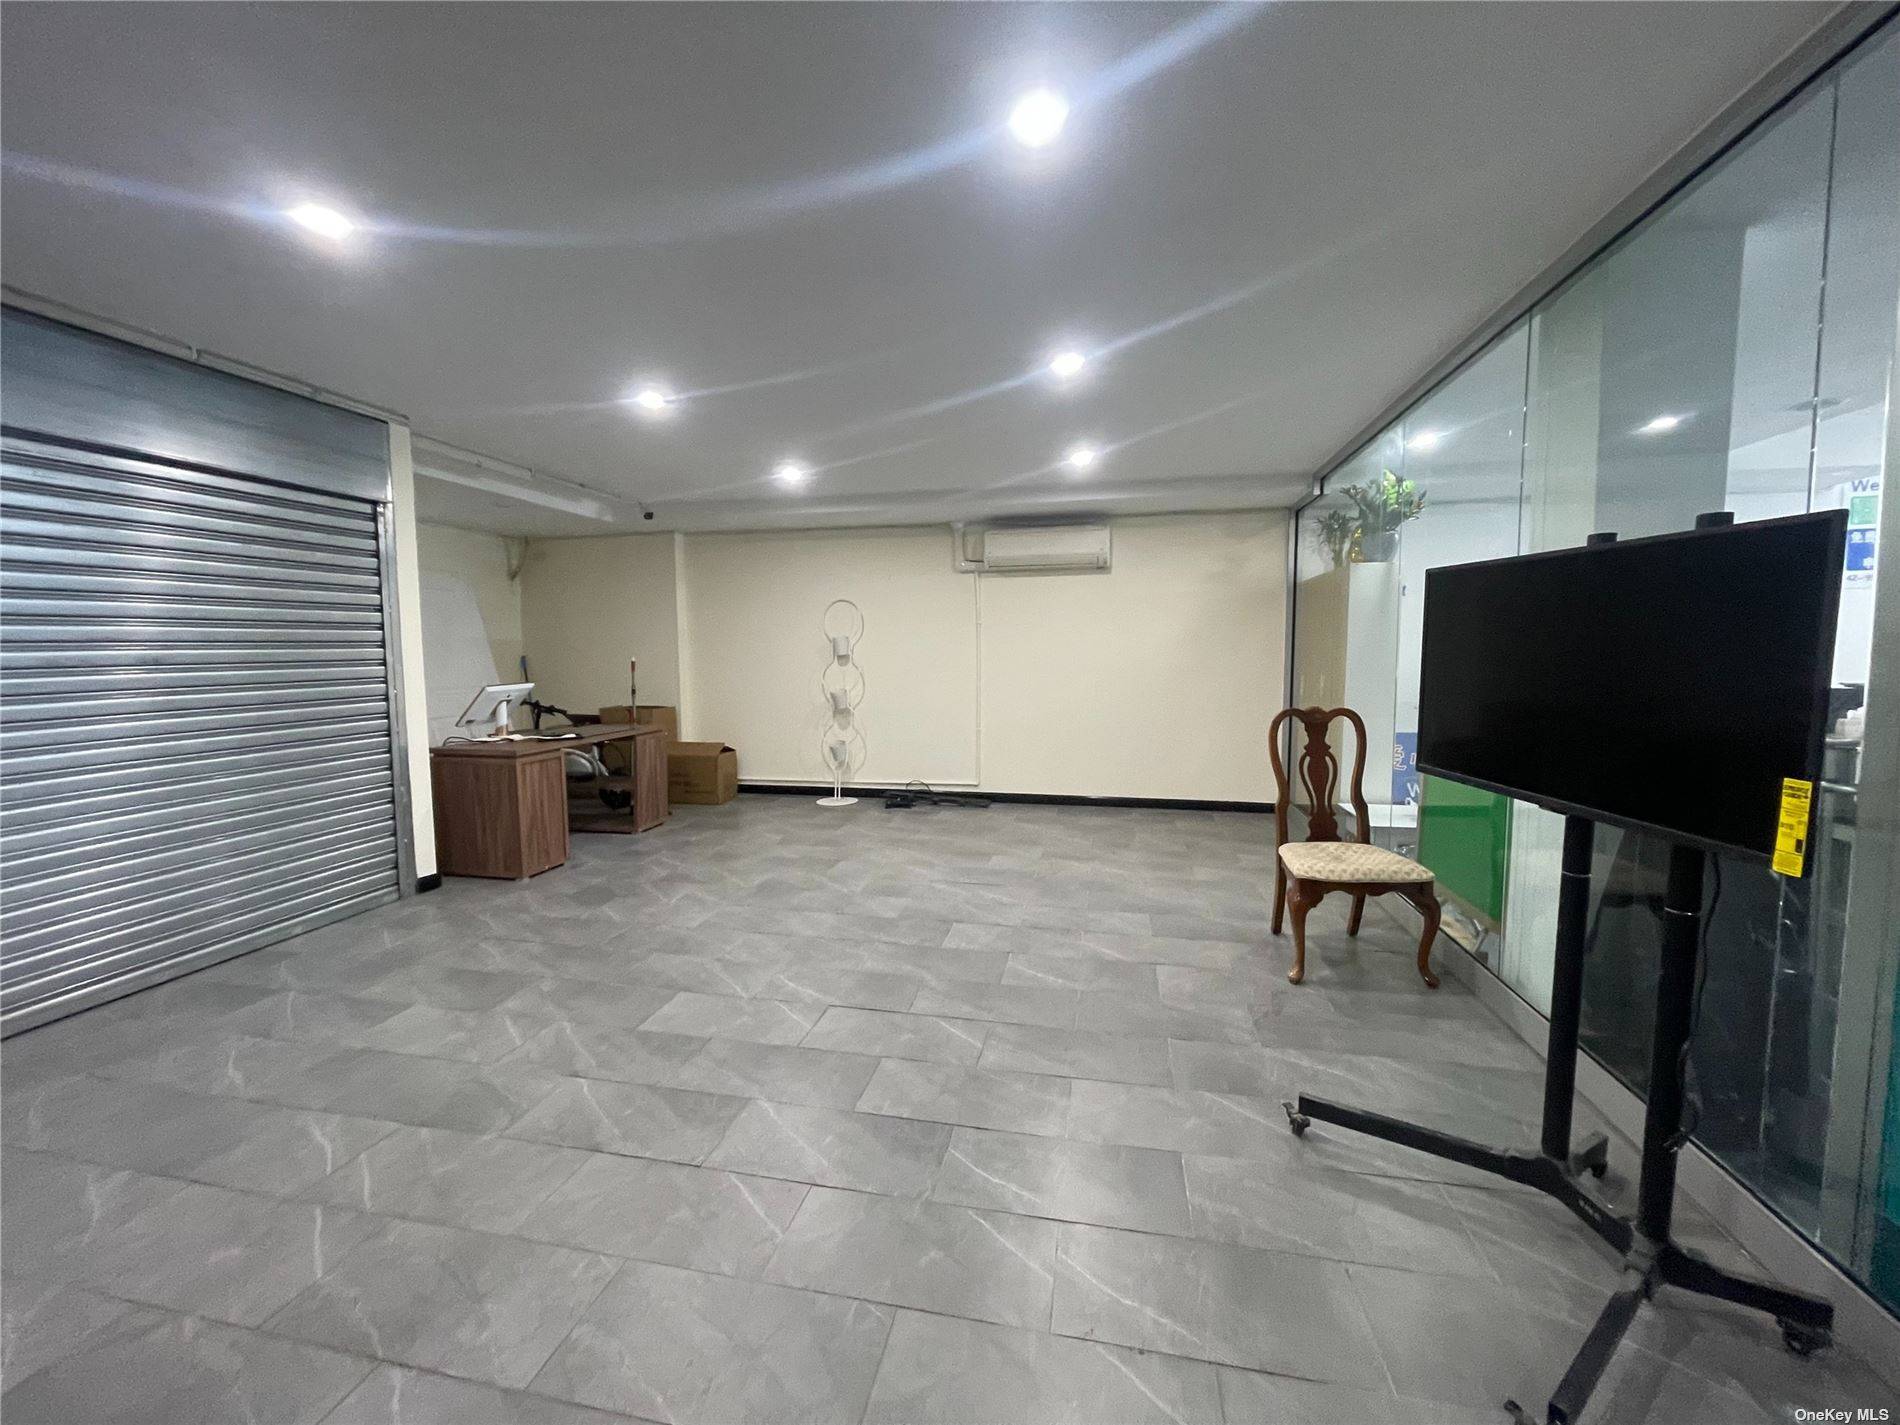 Commercial space for rent in center of flushing, space available to rent about 600 sqf in the rear of store front, can be used for office or merchandises displace, after ...